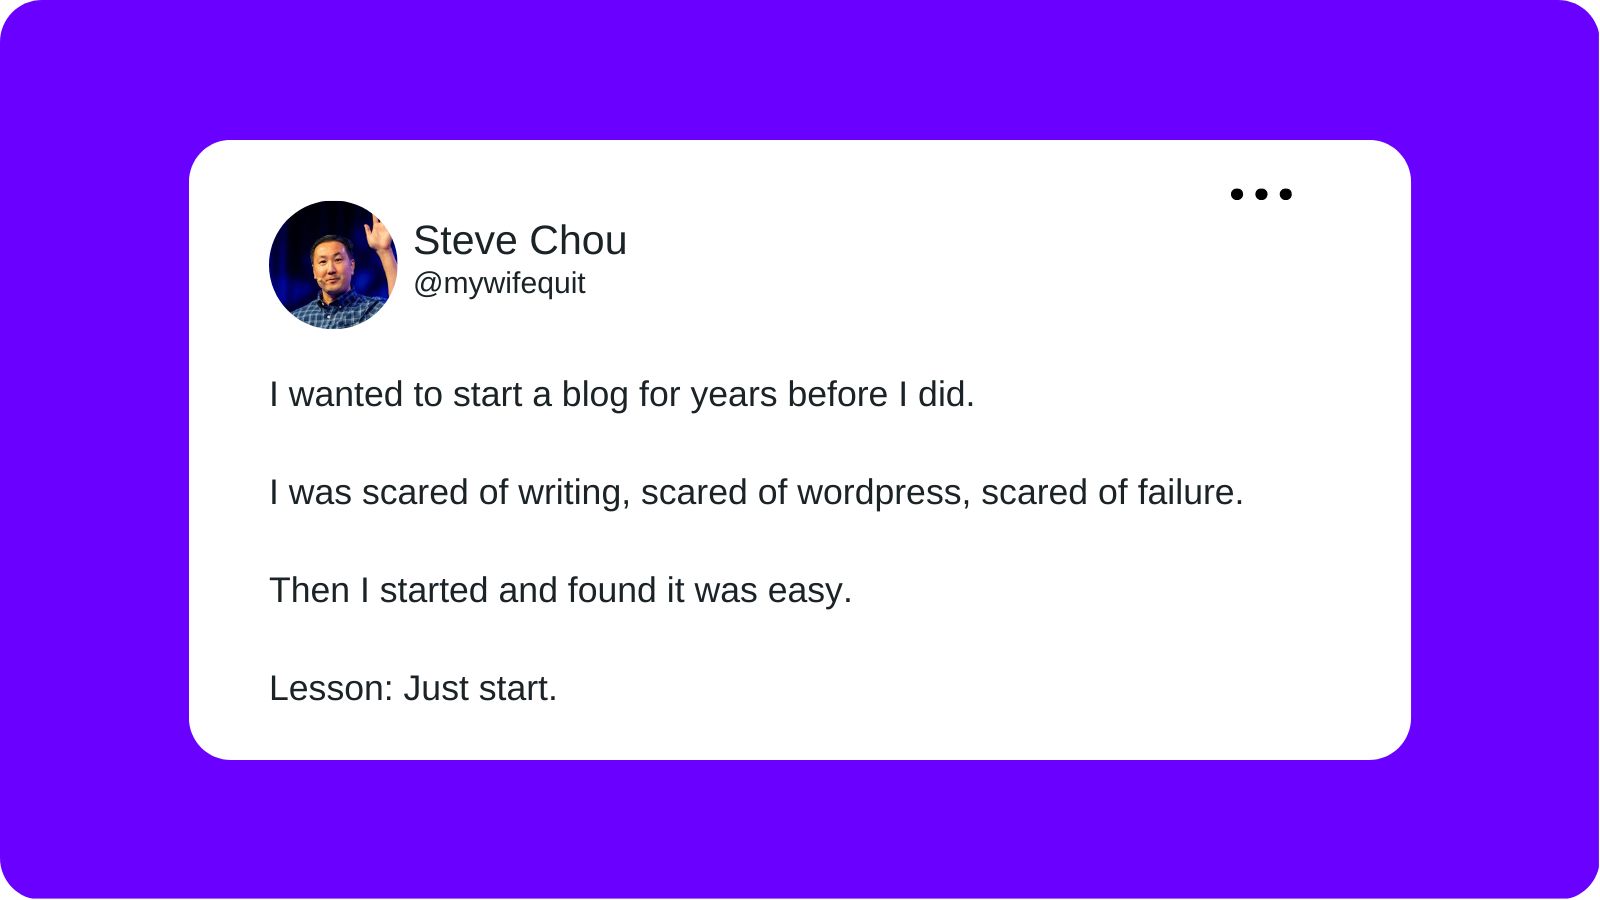 A tweet from Steve Chou layered over a purple background that reads "I wanted to start a blog for years before I did. I was scared of writing, scared of wordpress, scared of failure. Then I started and found it was easy. Lesson. Just start."